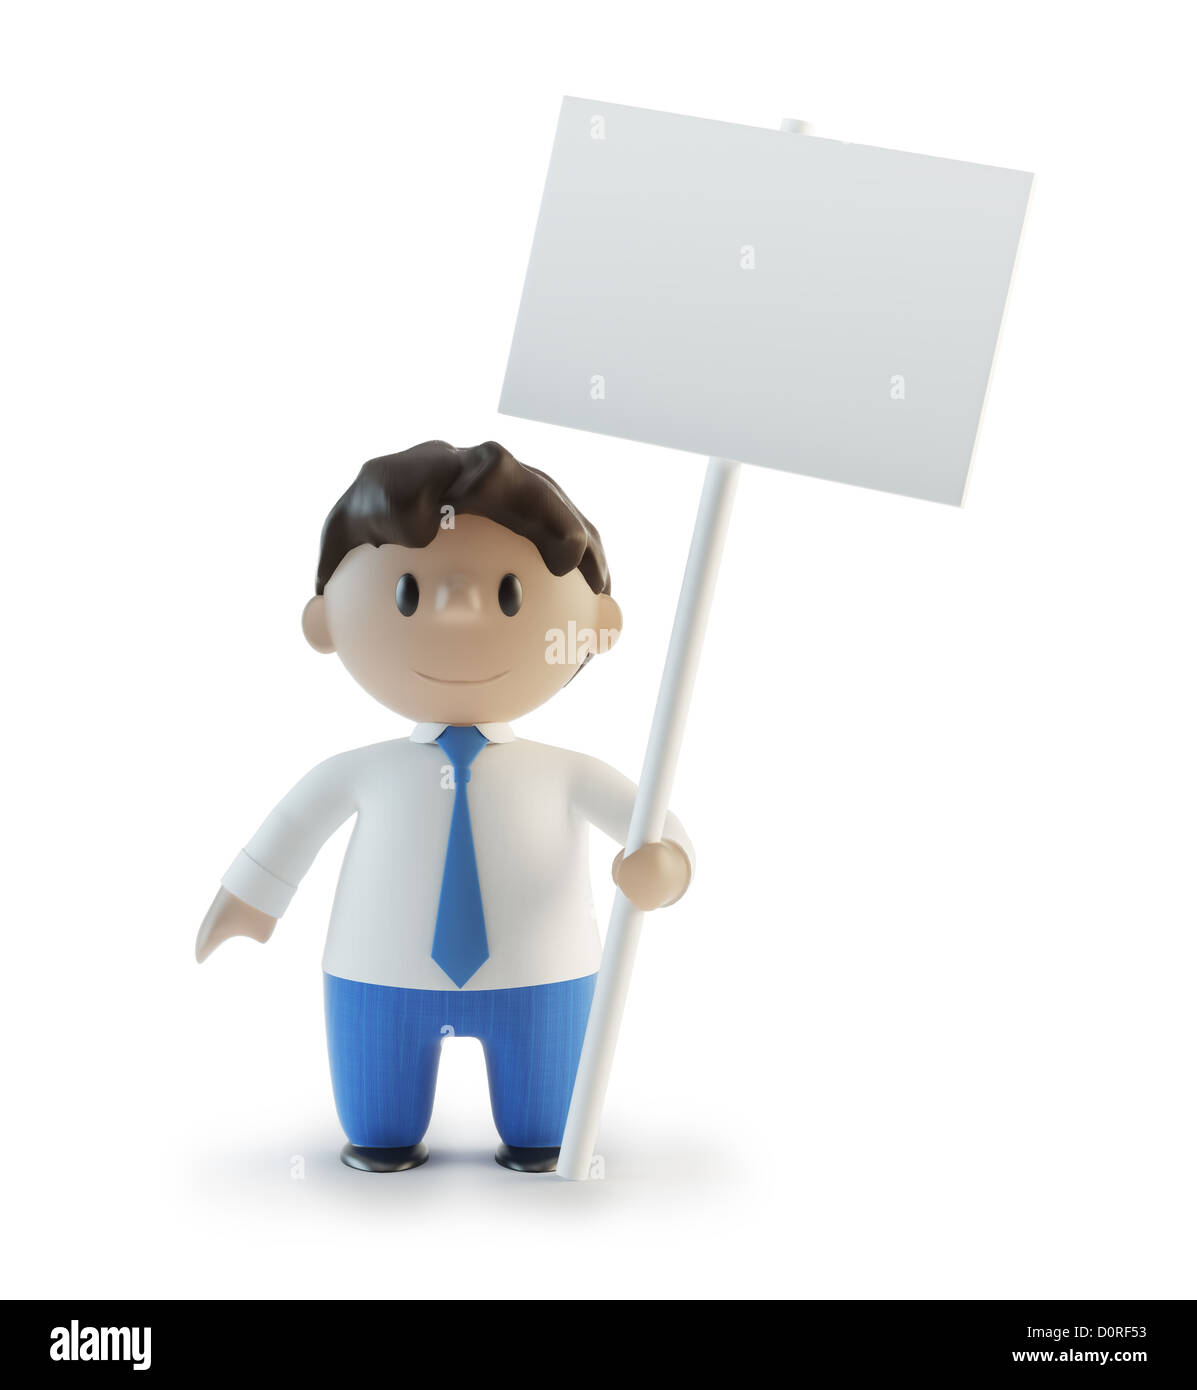 3D cartoon character holding a sign Stock Photo